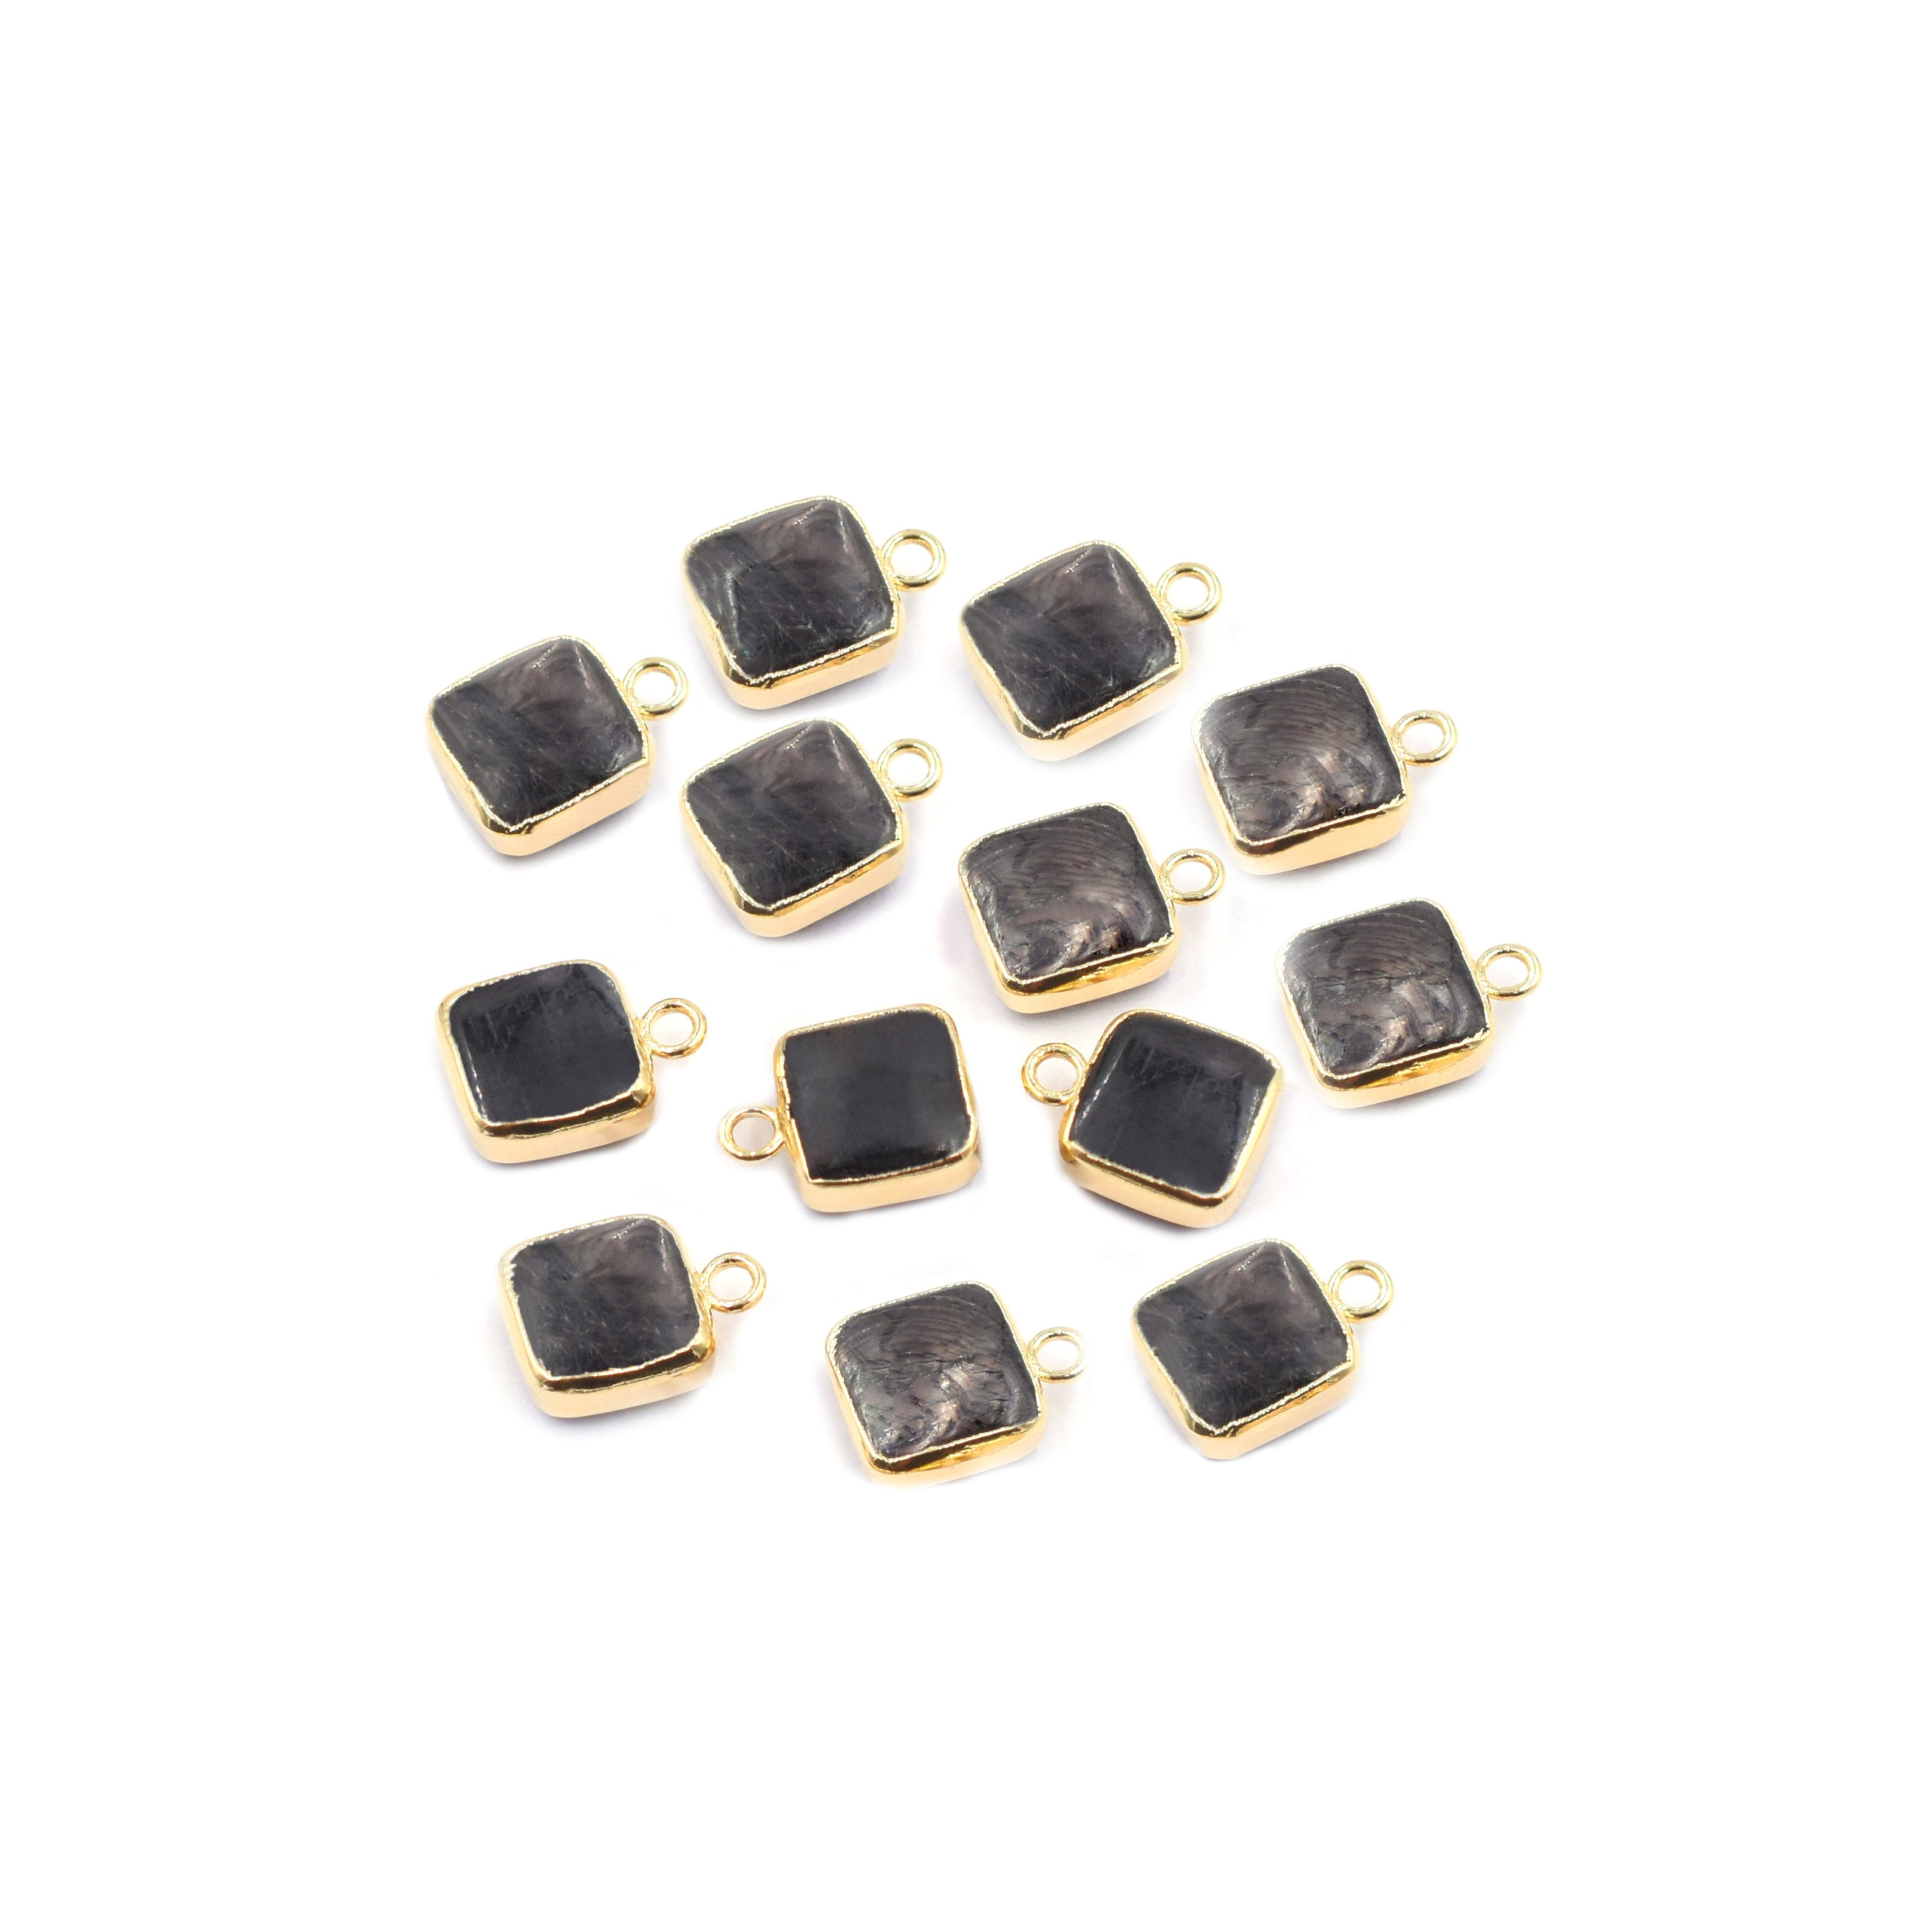 Hypersthene 10 MM Square Shape Gold Electroplated Pendant